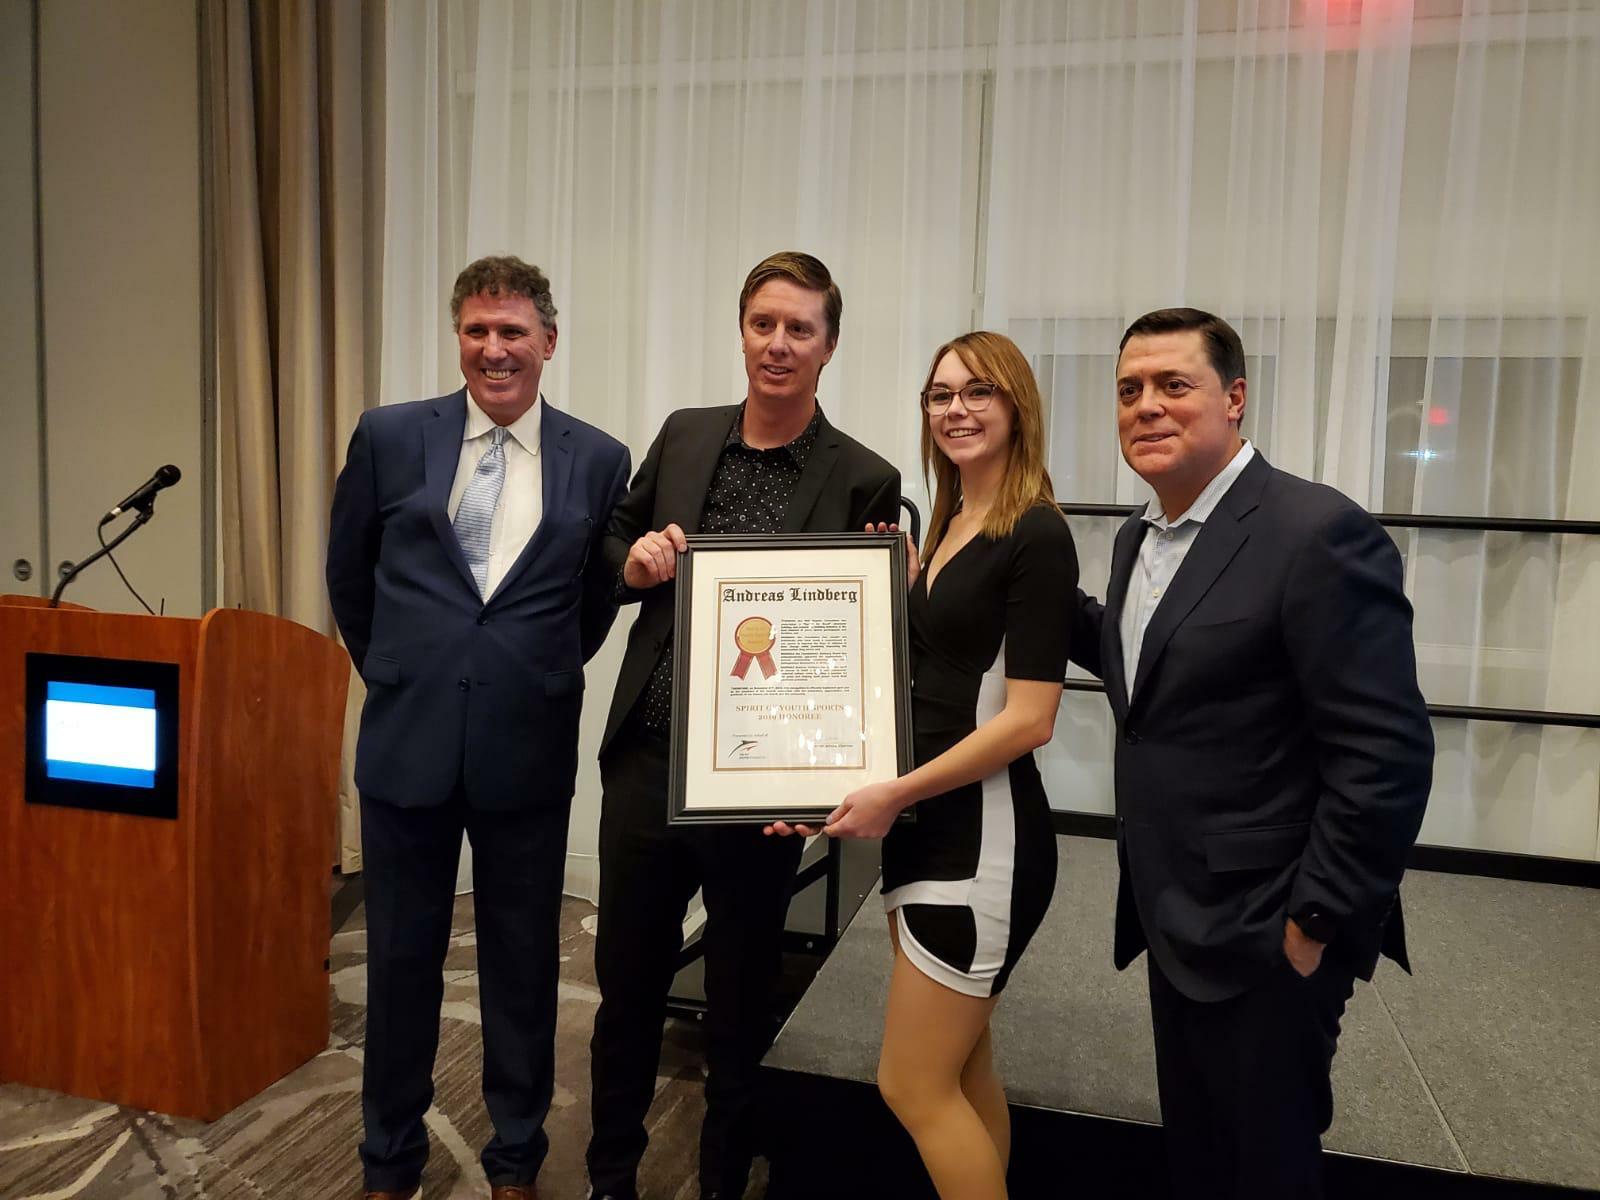 Andreas Lindberg was honored at the inaugural Spirit of Youth Sports Awards, hosted by the WVI Dolphin Foundation at the Residence Inn by Marriott in Riverhead in November, for his work with the Southampton Soccer Club.